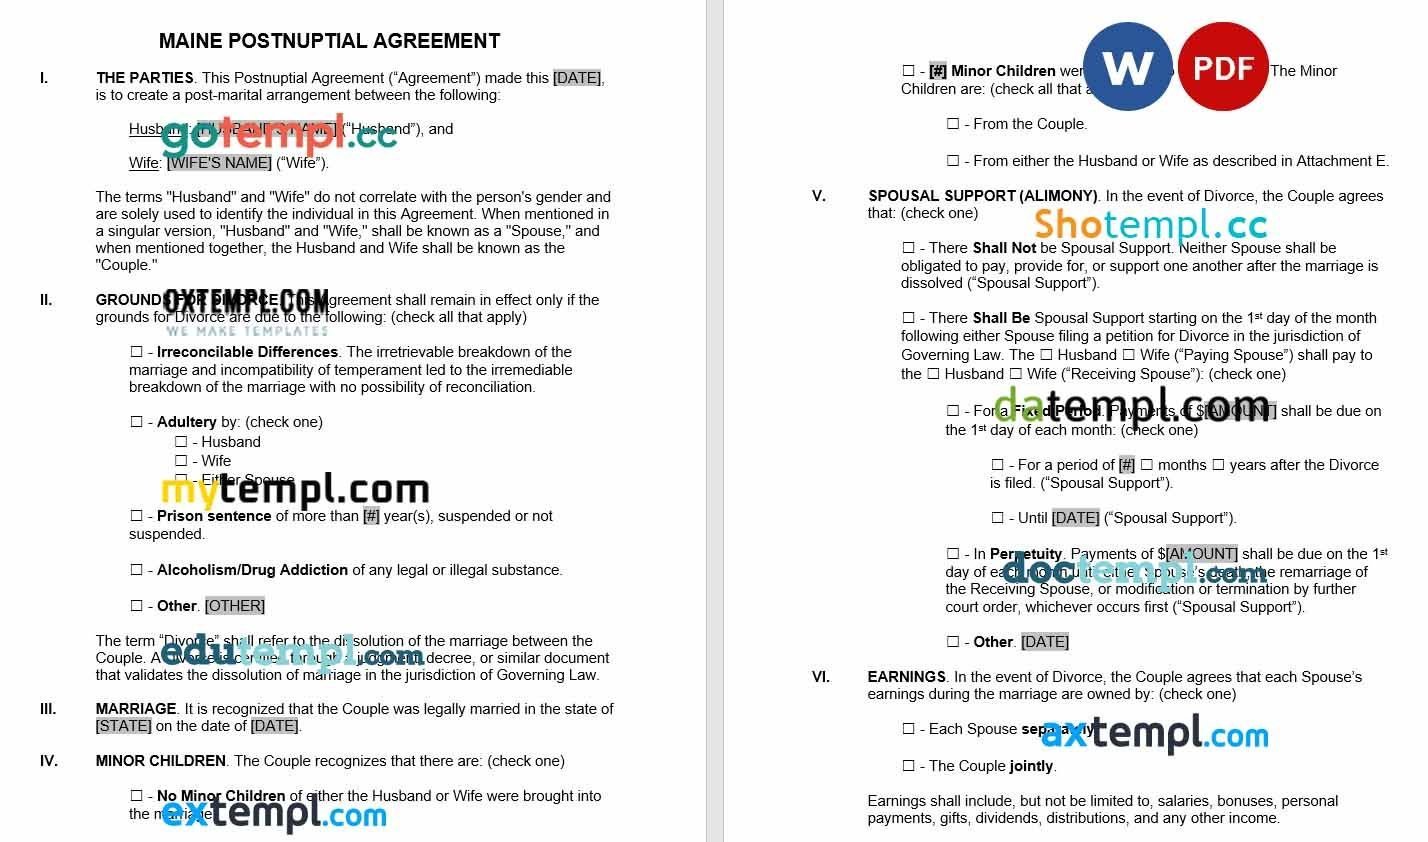 Maine Postnuptial Agreement Word example, fully editable